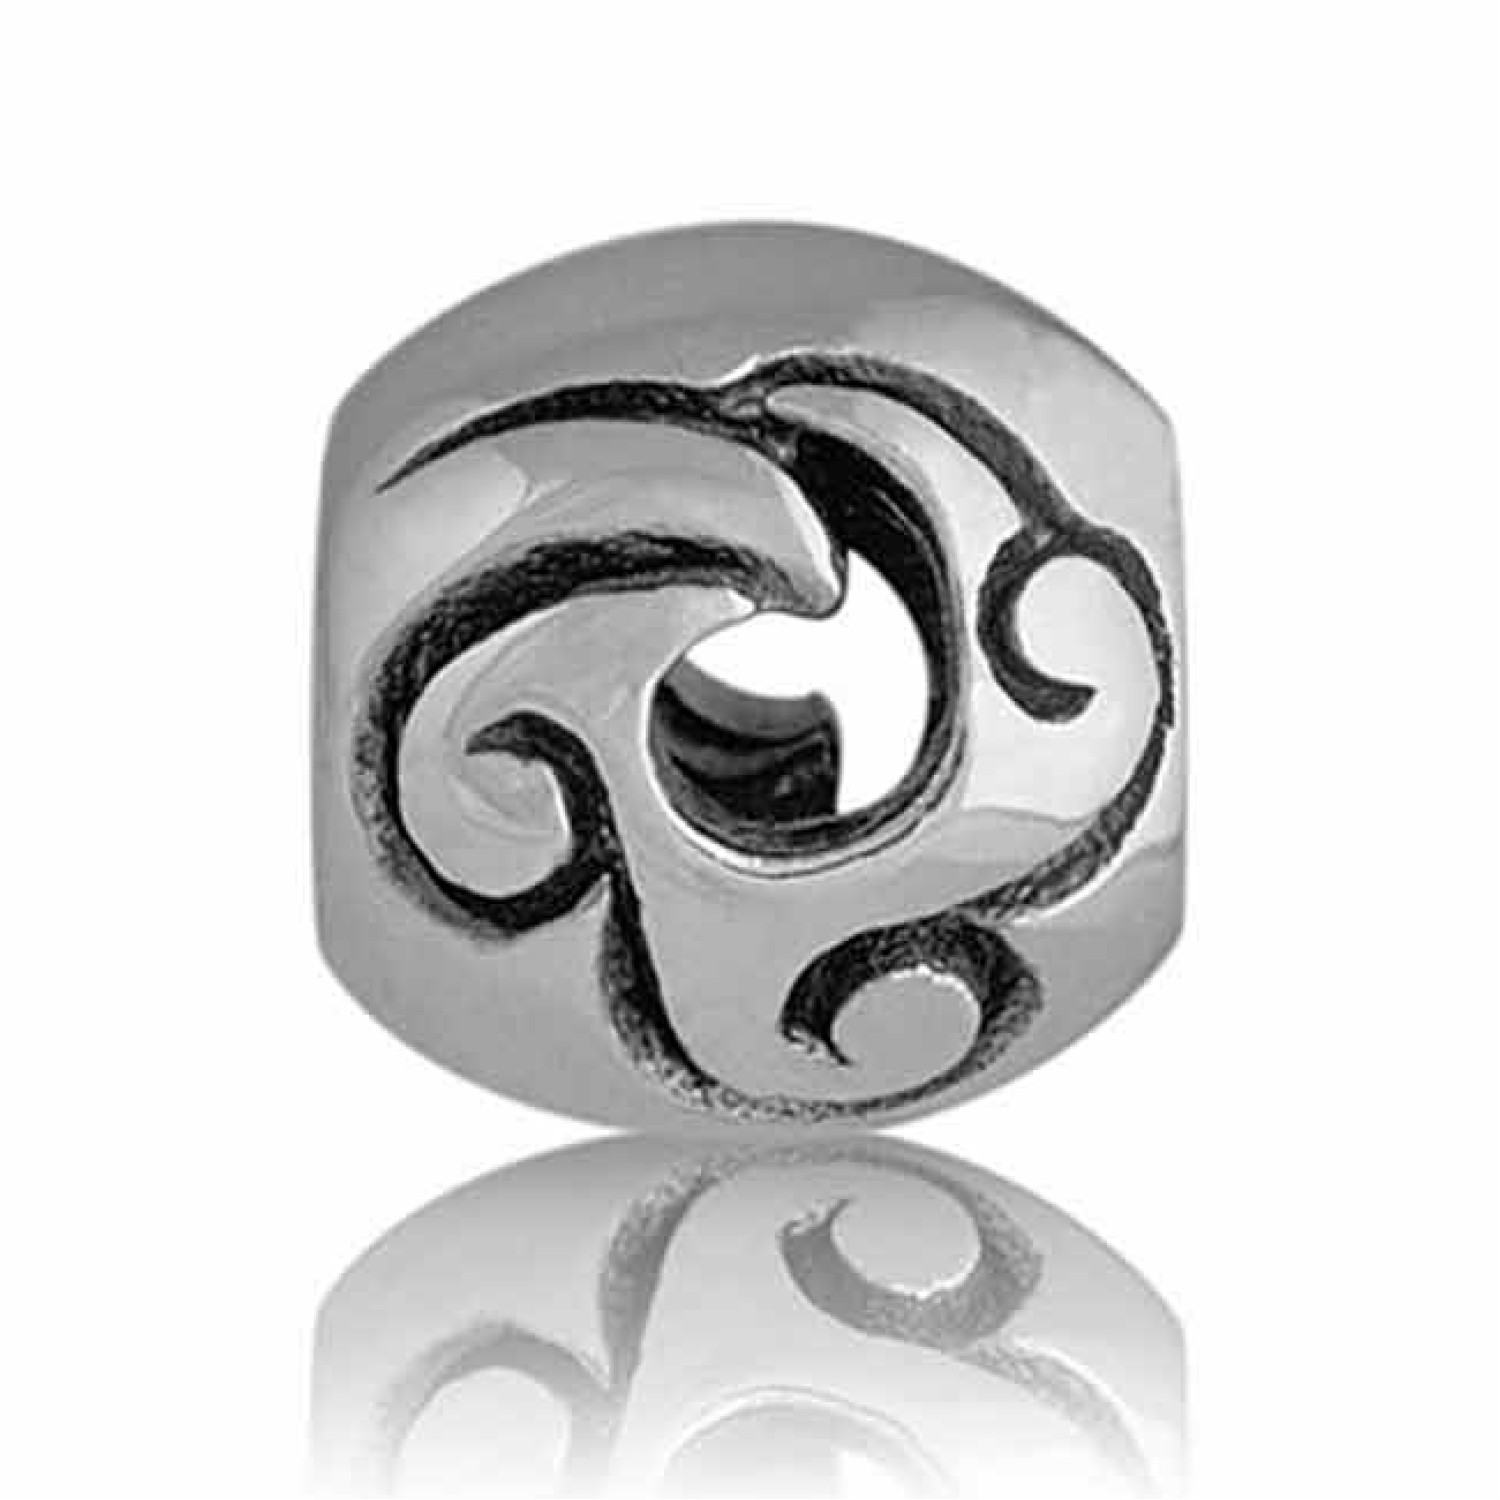 LK010 Evolve NZ Cloud - Aotearoa. New Zealands Maori name is Aotearoa, meaning ‘land of the long white cloud’. This Evolve Charm celebrates the lush magic and stunning vistas of Aotearoa’s land, sea and sky. Our famous landscapes are defined by their ma @